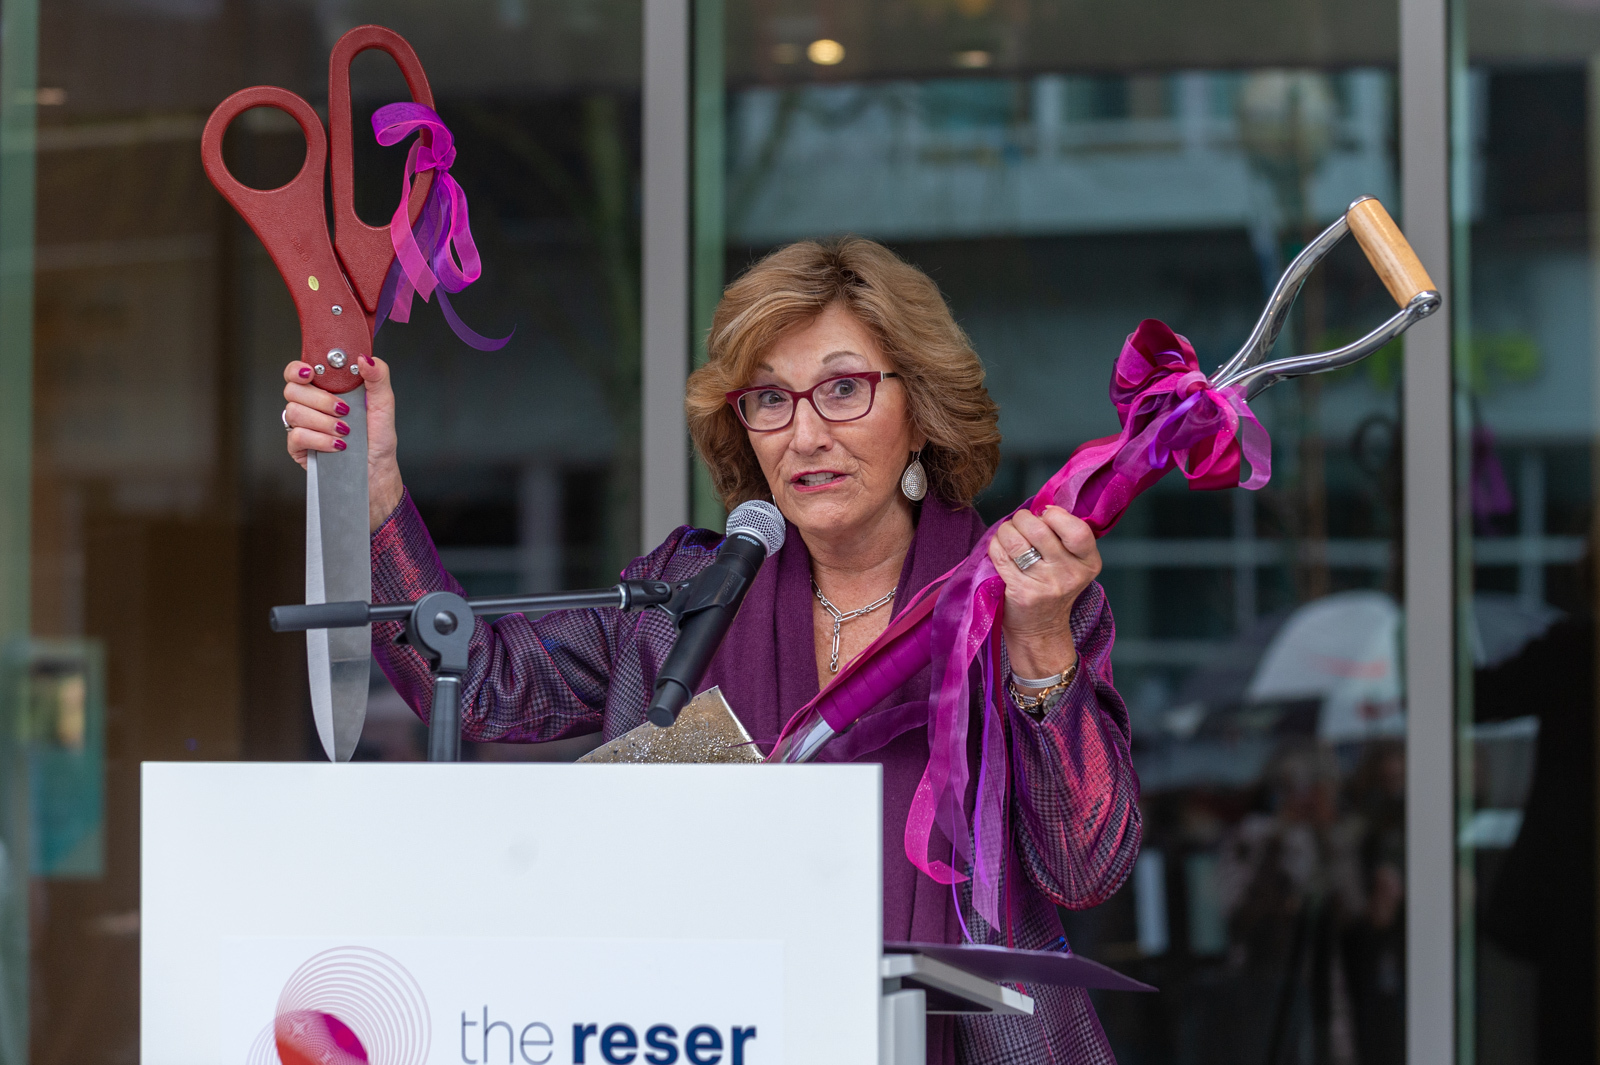 Cutting the ribbon at the opening of the Reser in Spring 2022. Image courtesy of Beaverton Arts Foundation.